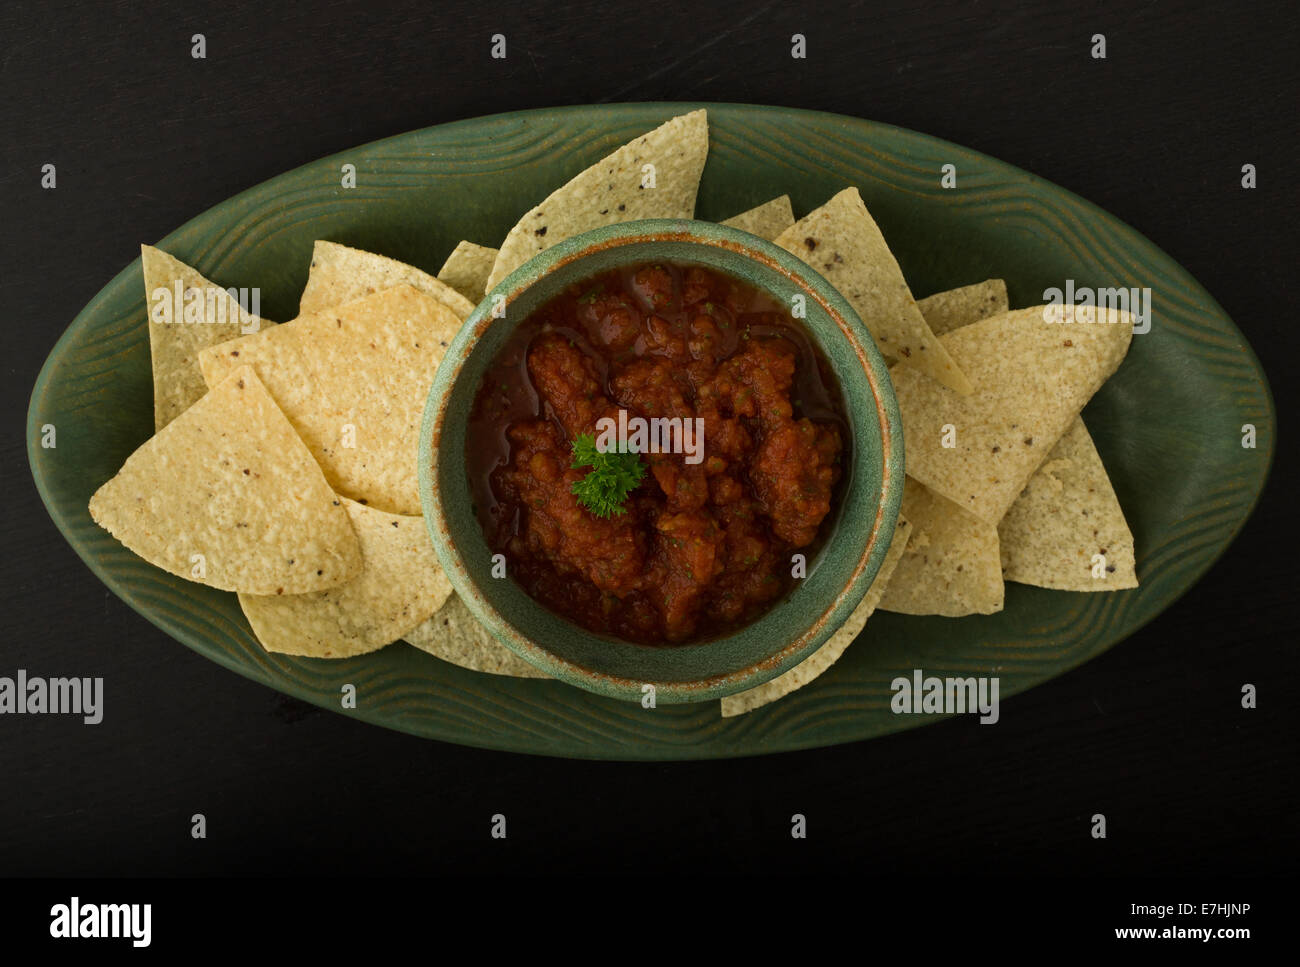 Tortilla white corn chips and fresh homemade tomato based salsa from above. Stock Photo